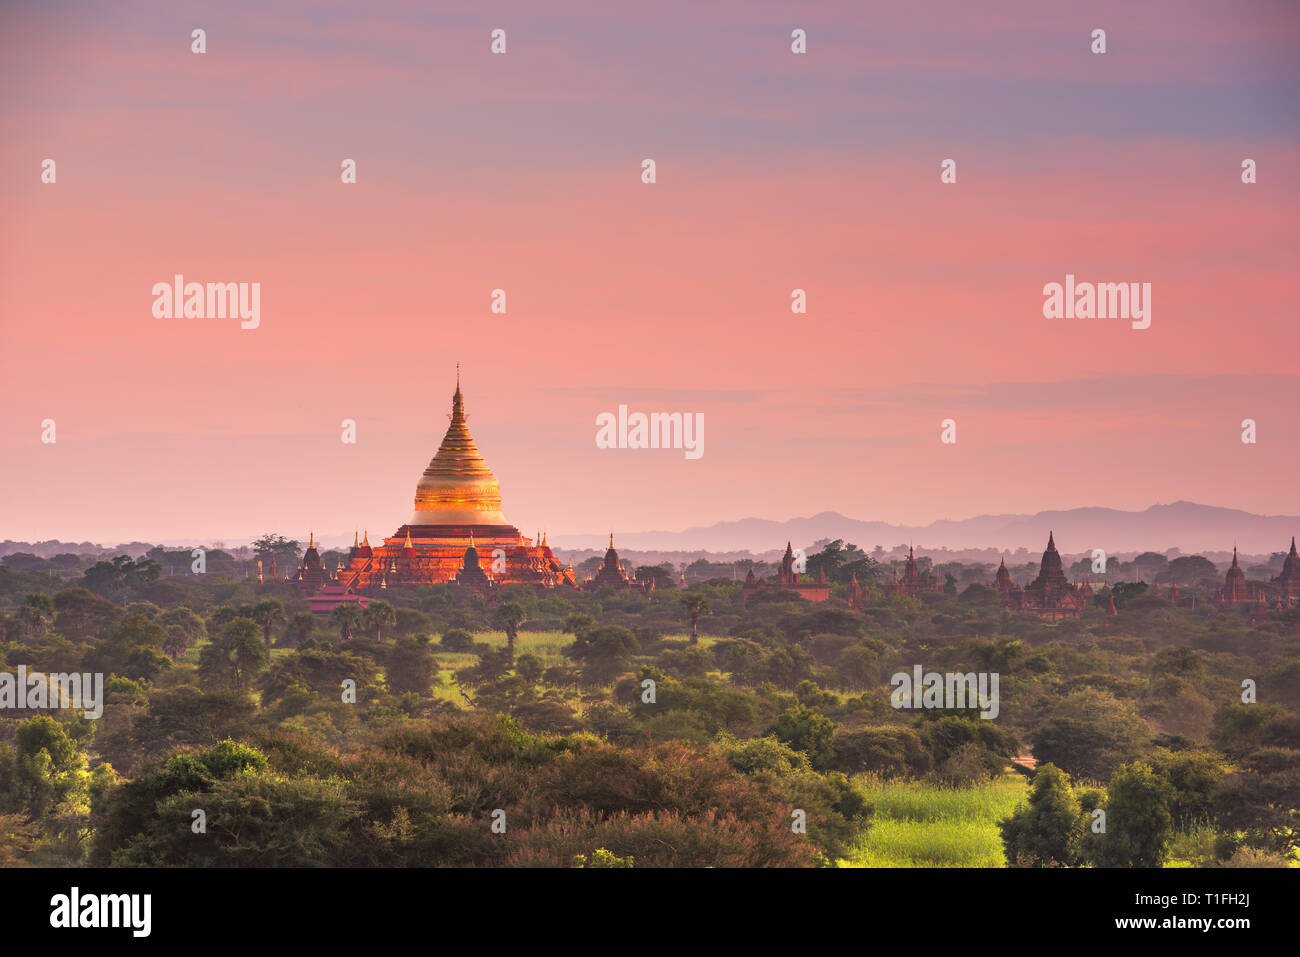 Bagan, Myanmar ancient temple ruins landscape with Ananda Temple in the archaeological zone at dusk. Stock Photo